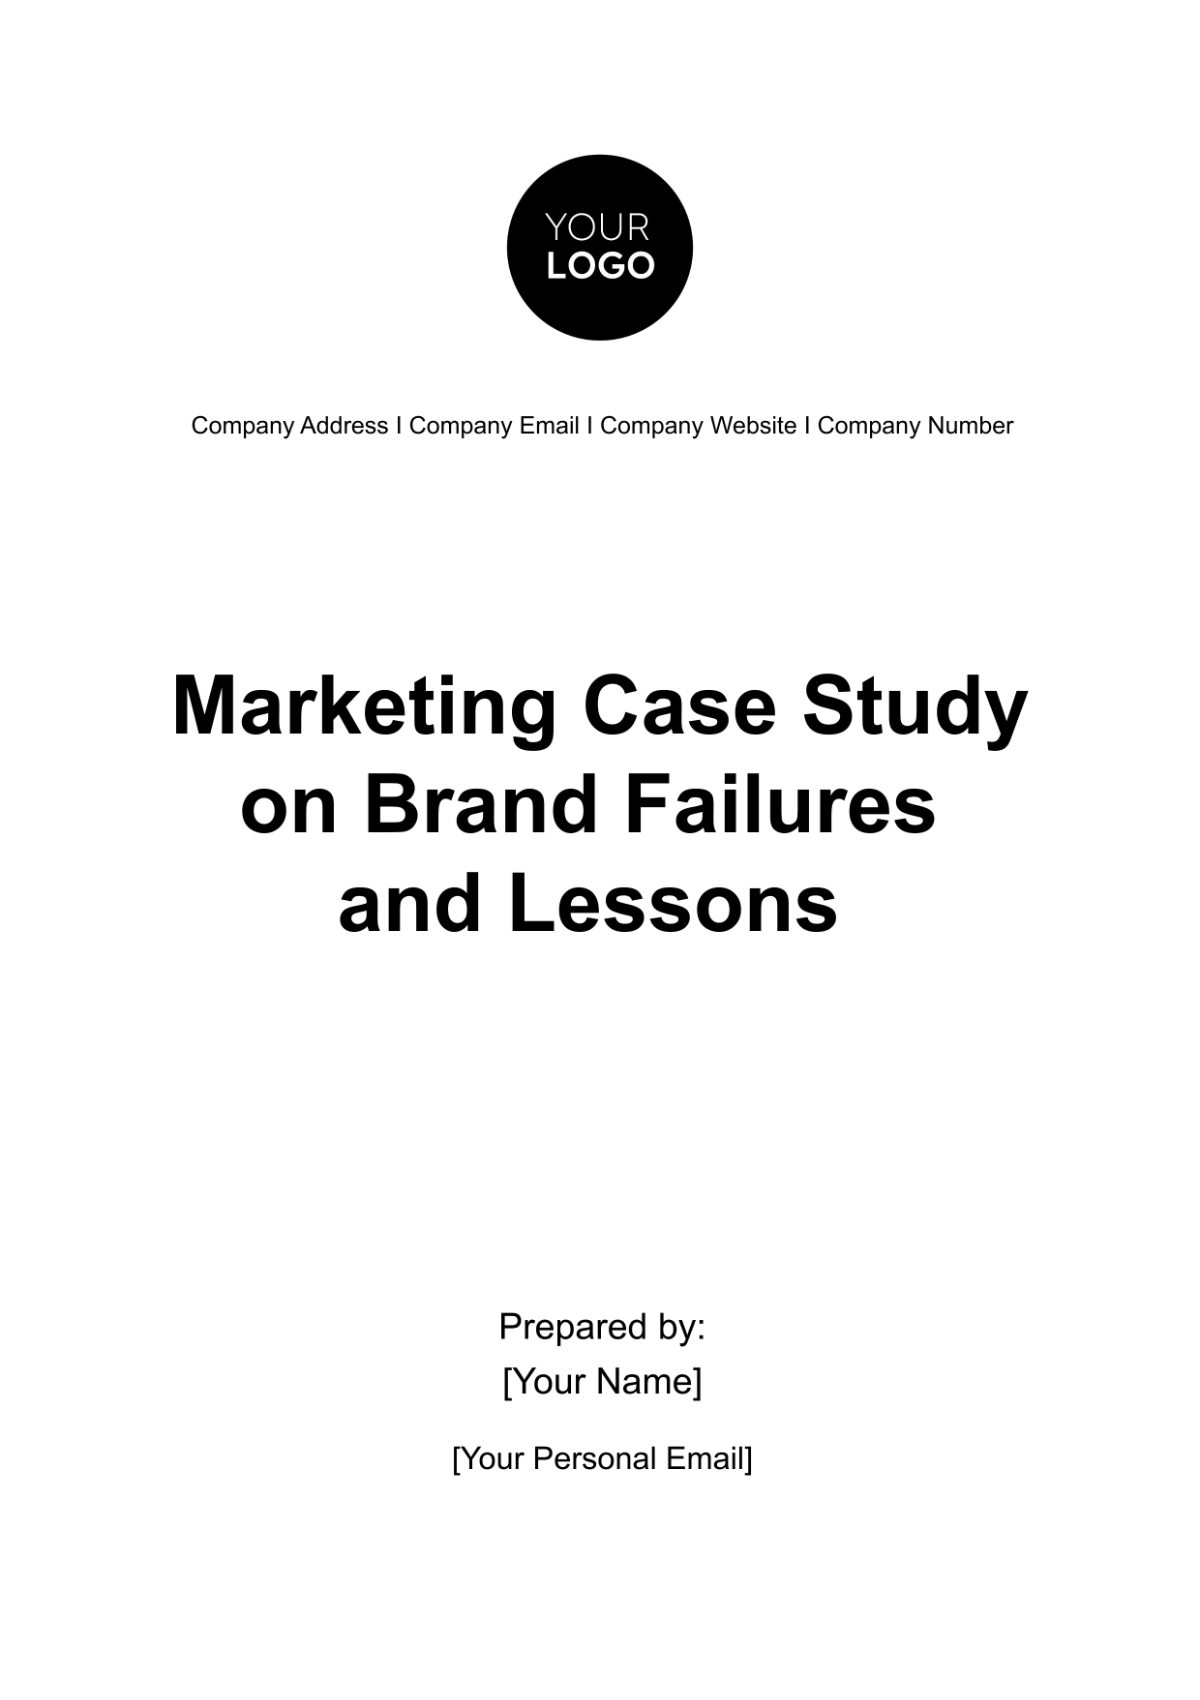 Free Marketing Case Study on Brand Failures and Lessons Template